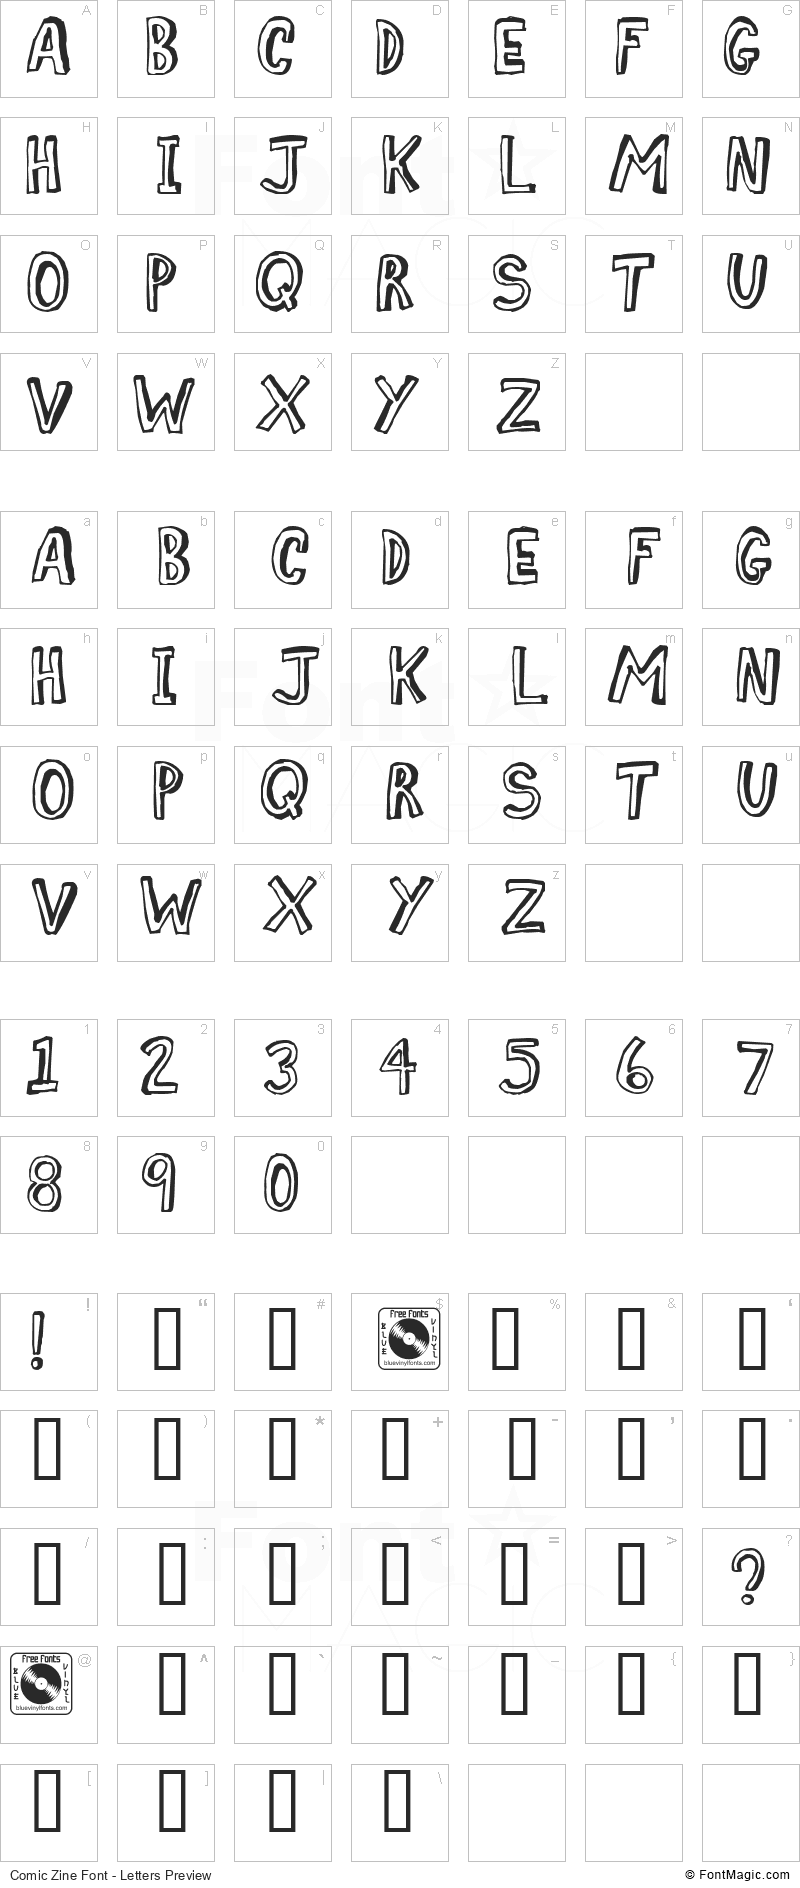 Comic Zine Font - All Latters Preview Chart